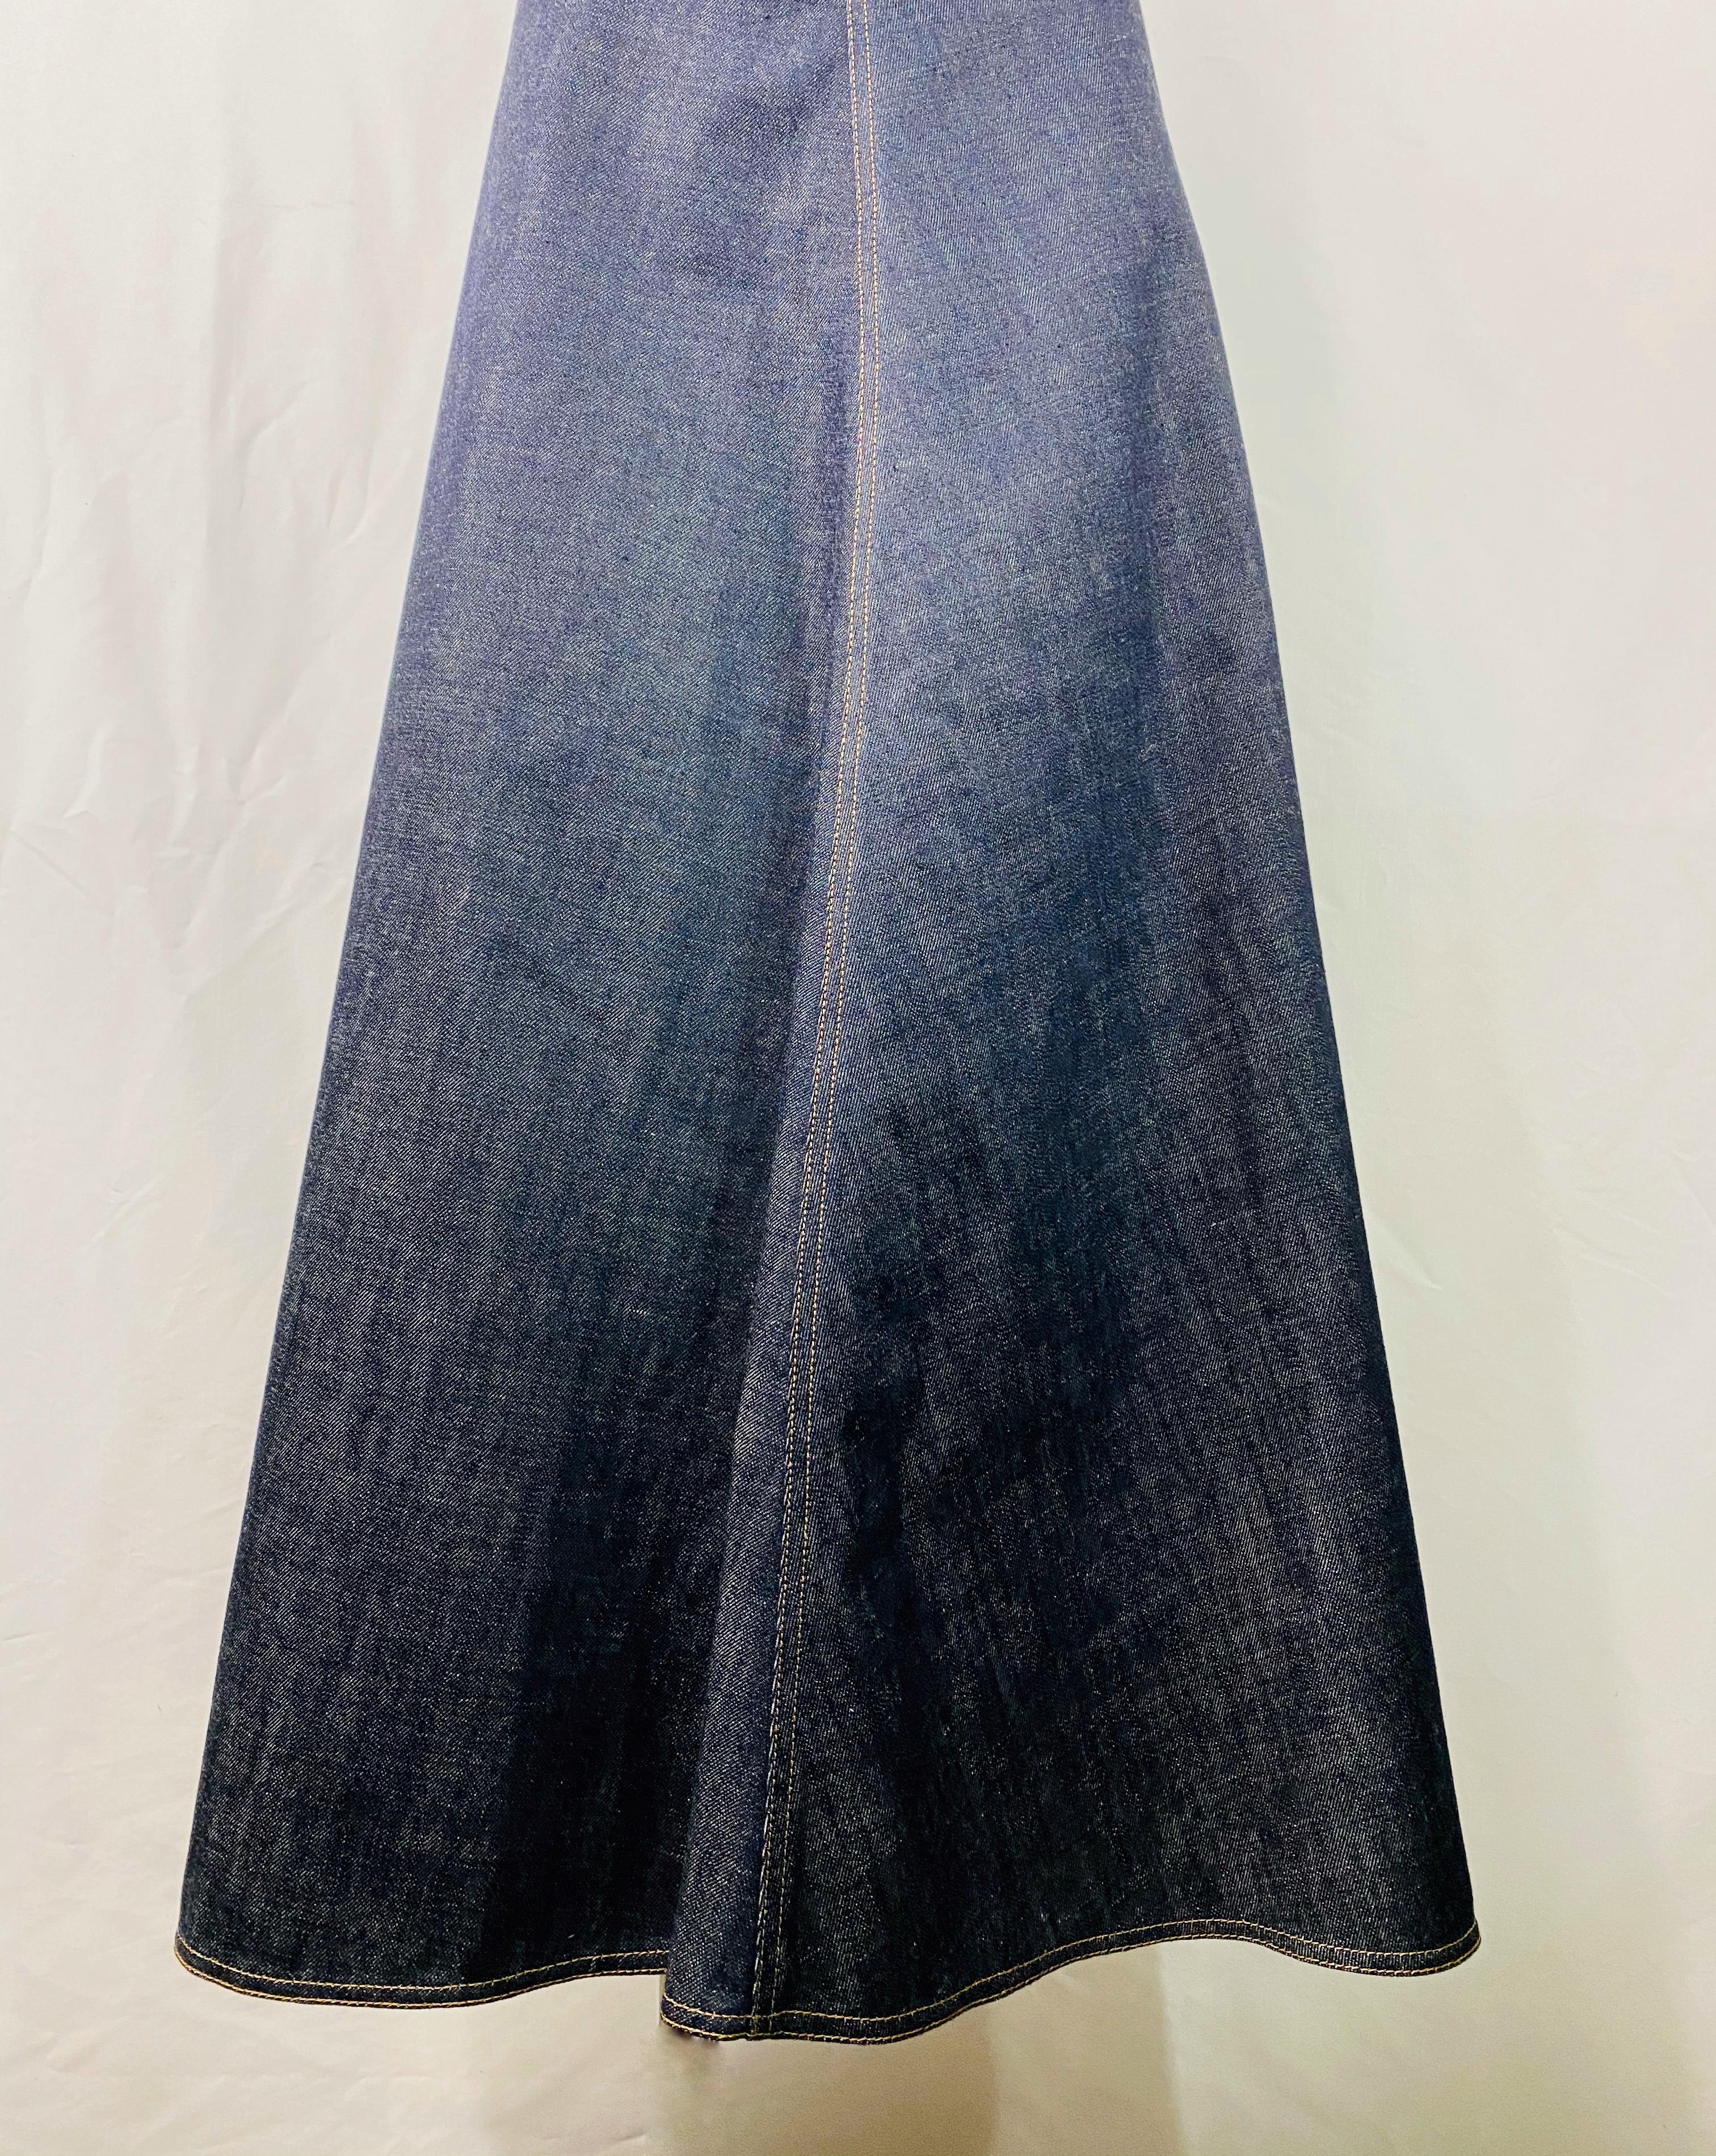 Product details:

Size FR 38, US6.
Featuring dark blue/ navy wash denim, flare style, floor length skirt with rear hook and zip silver tone hardware stamped CD closure.
Made in Italy.
